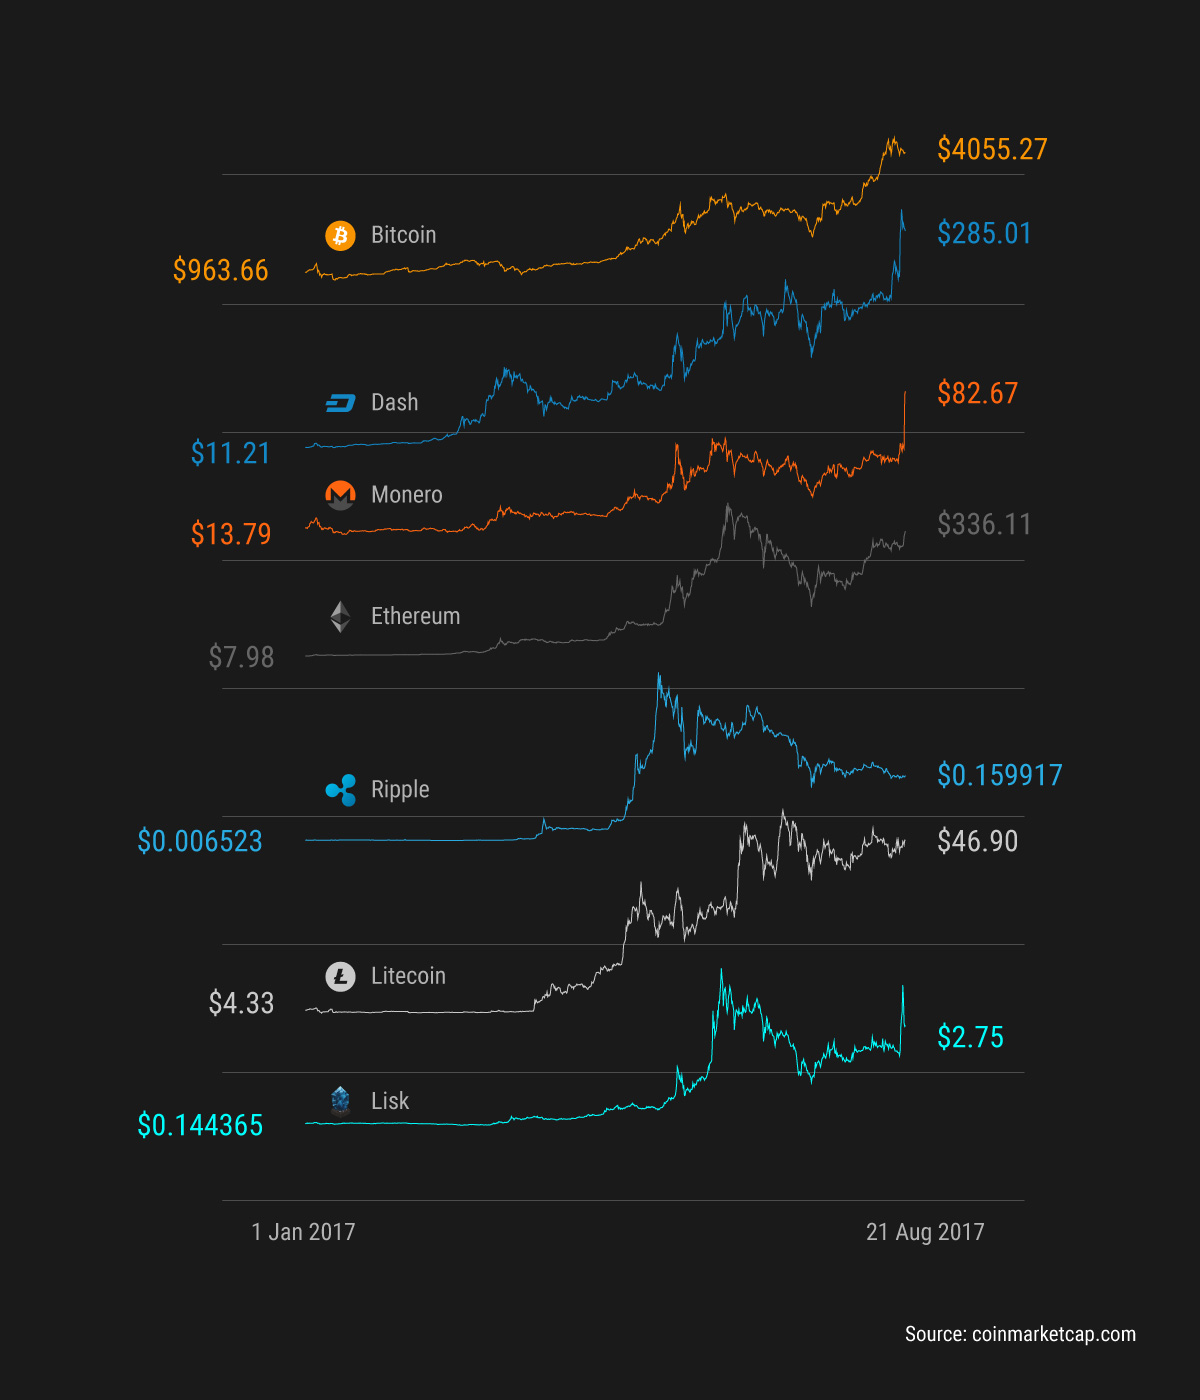 Altcoin price rise in 2017